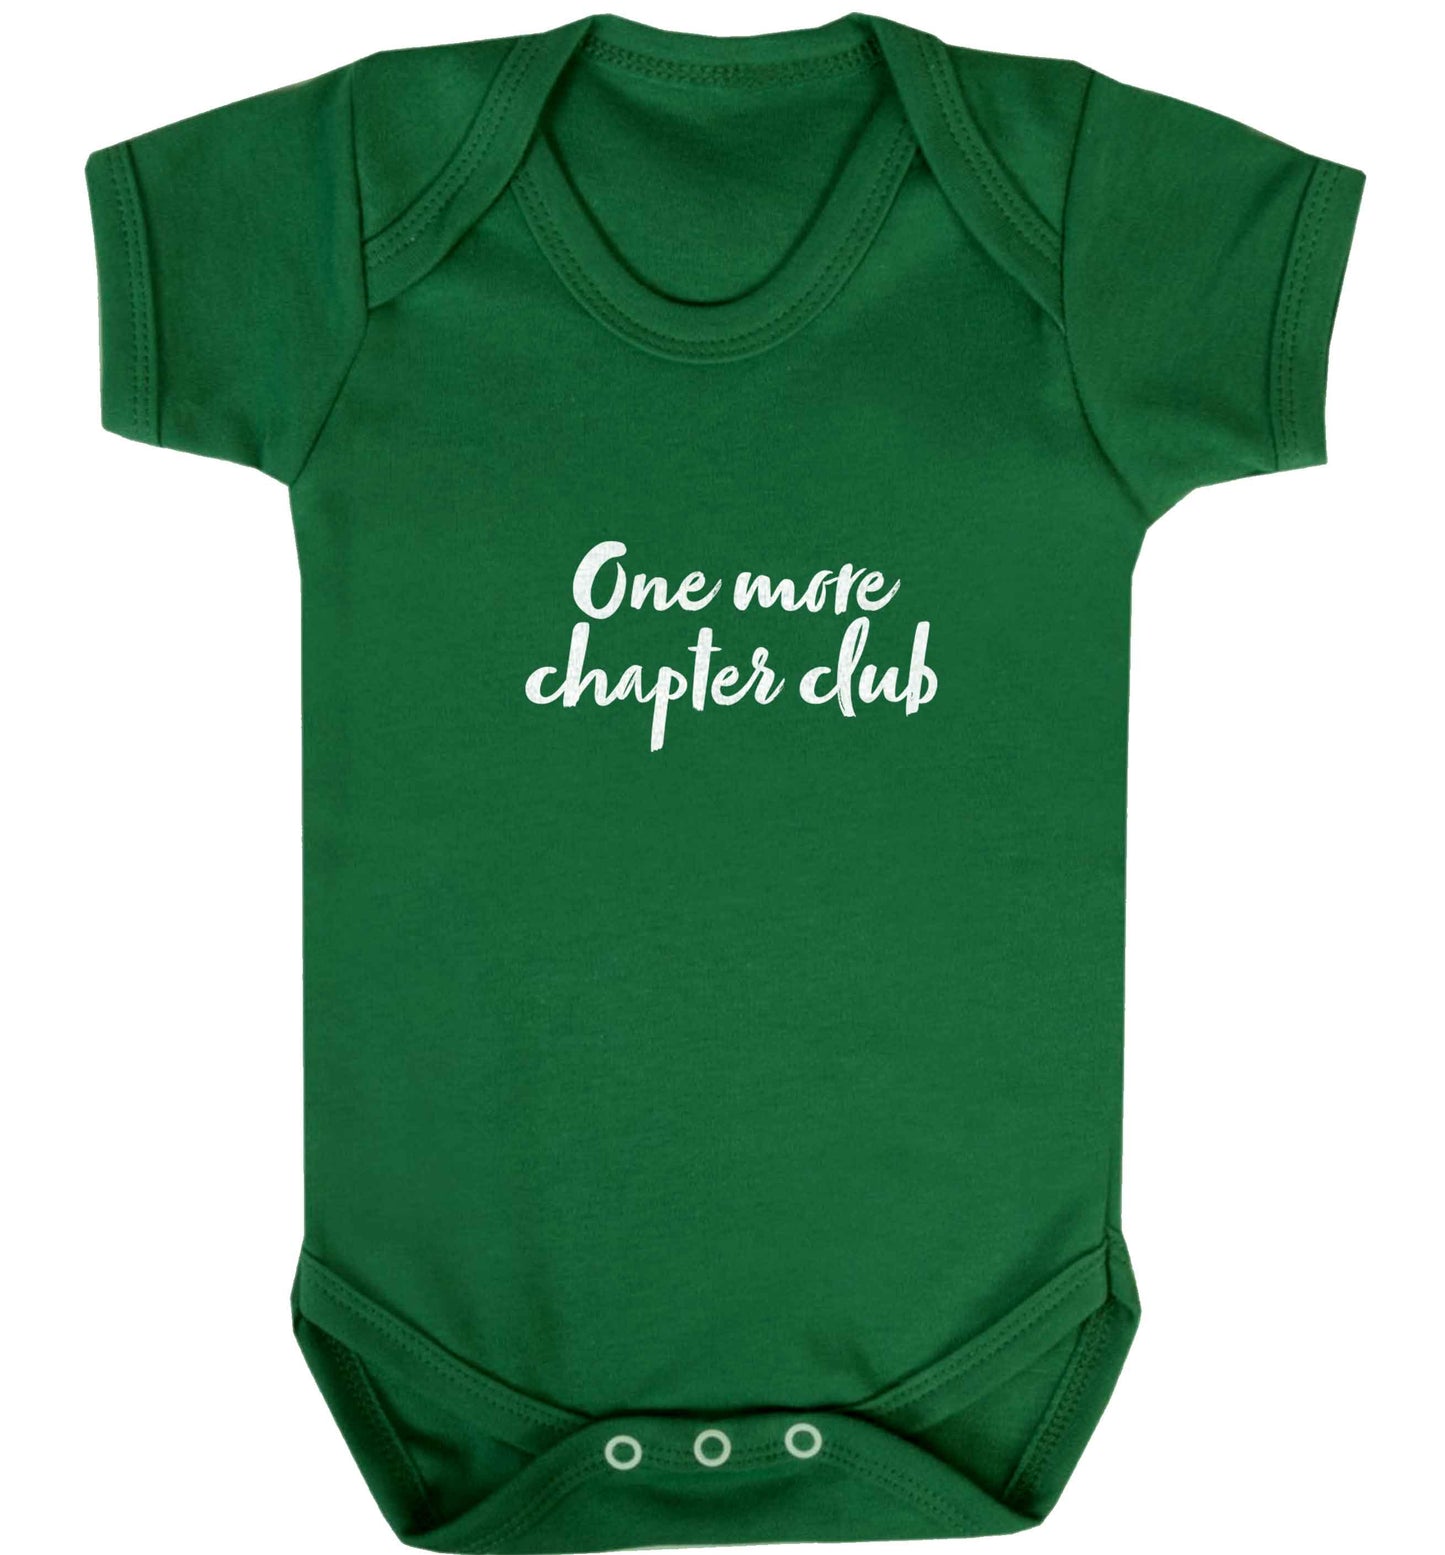 One more chapter club Kit baby vest green 18-24 months